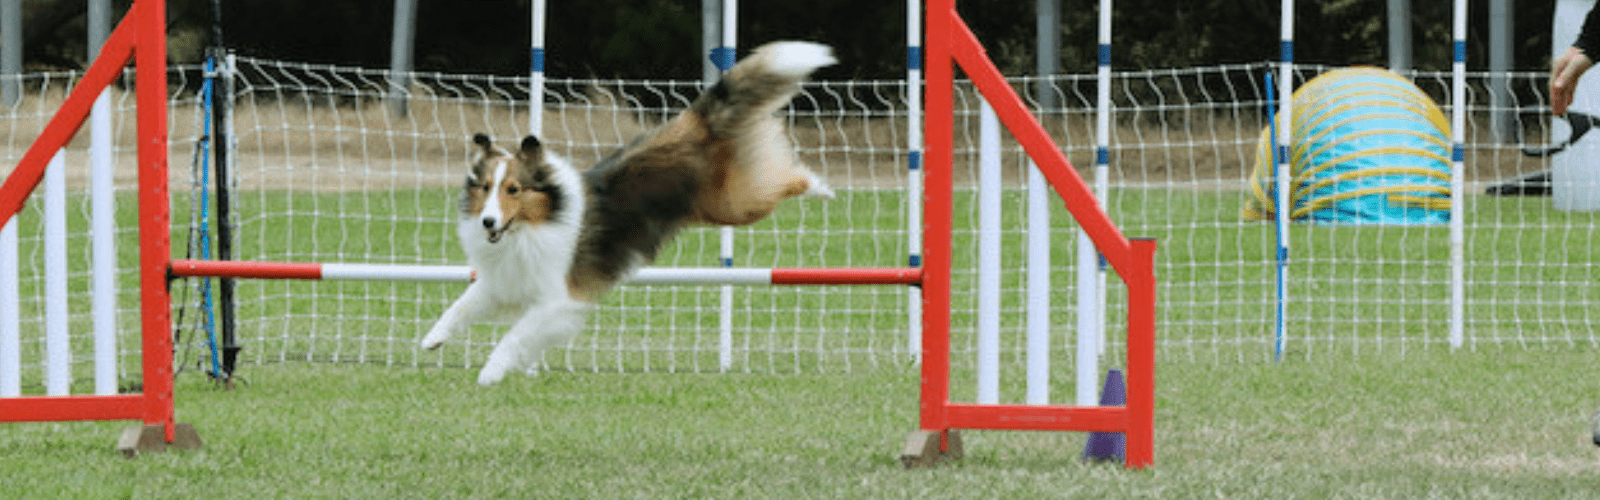 Phoenix Jumping on Agility Course